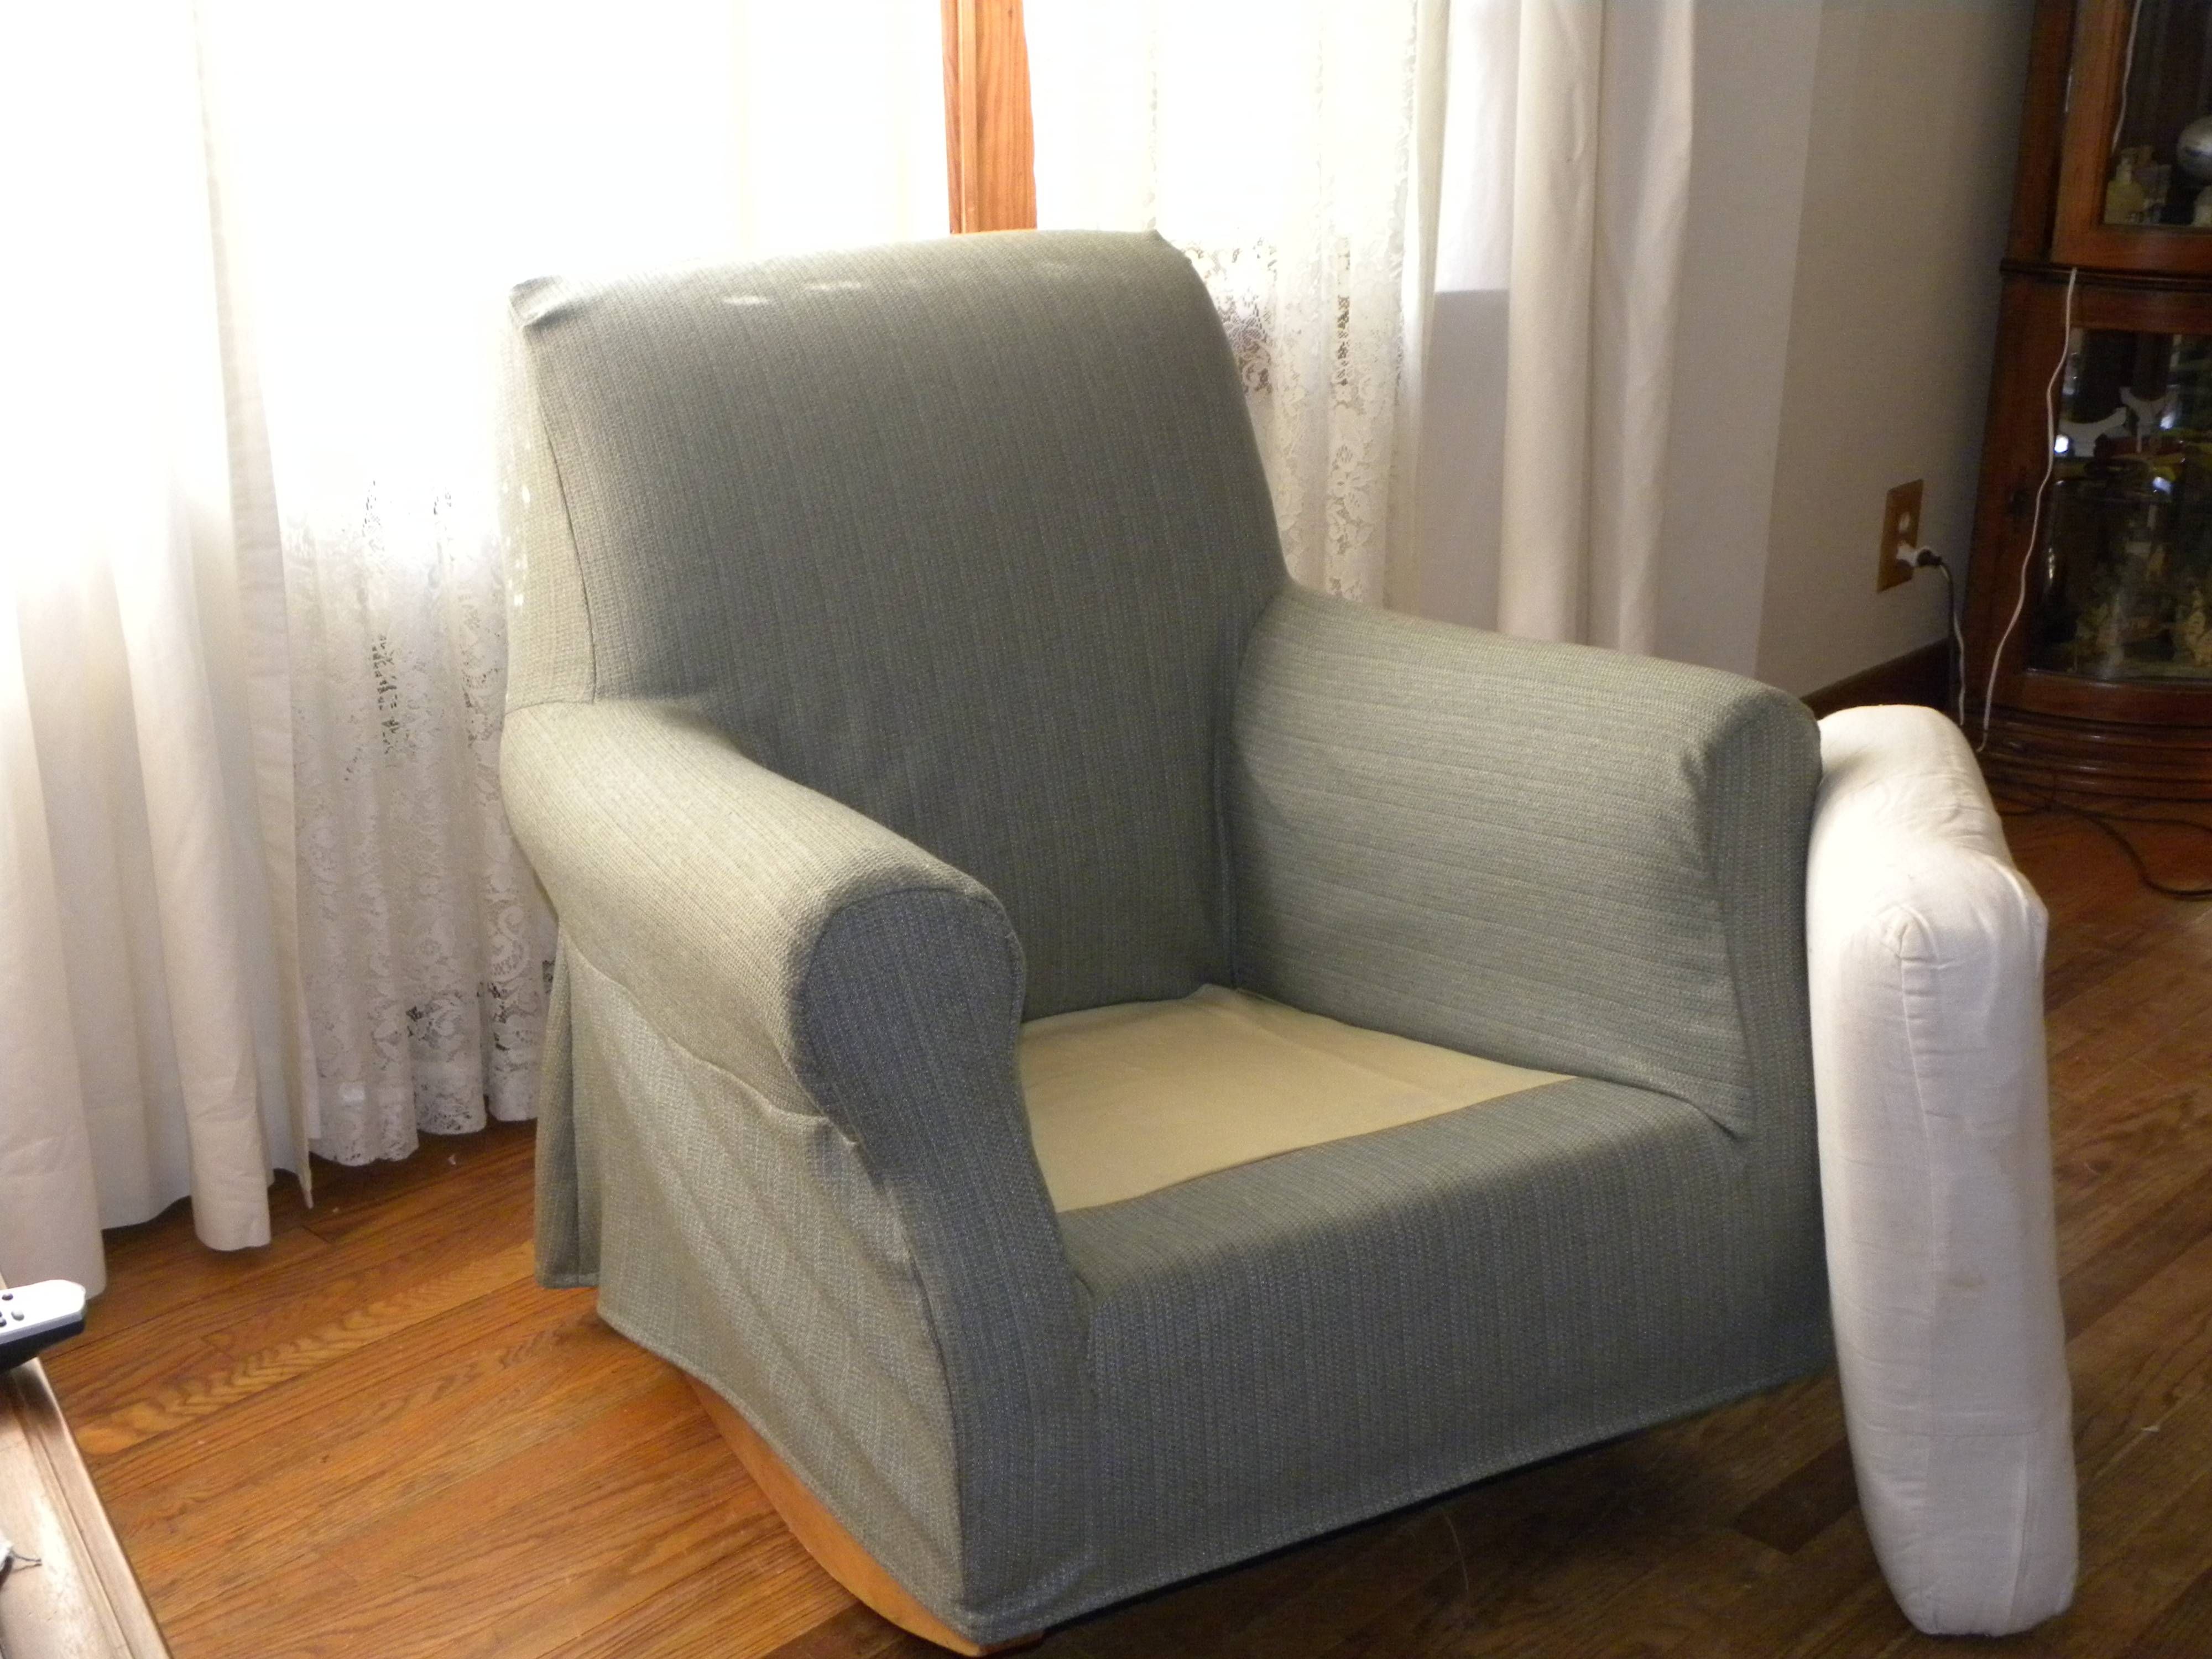 Decor: Charming Pottery Barn Slipcovers For Sofa And Chair Pertaining To Mitchell Gold Sofa Slipcovers (View 11 of 26)